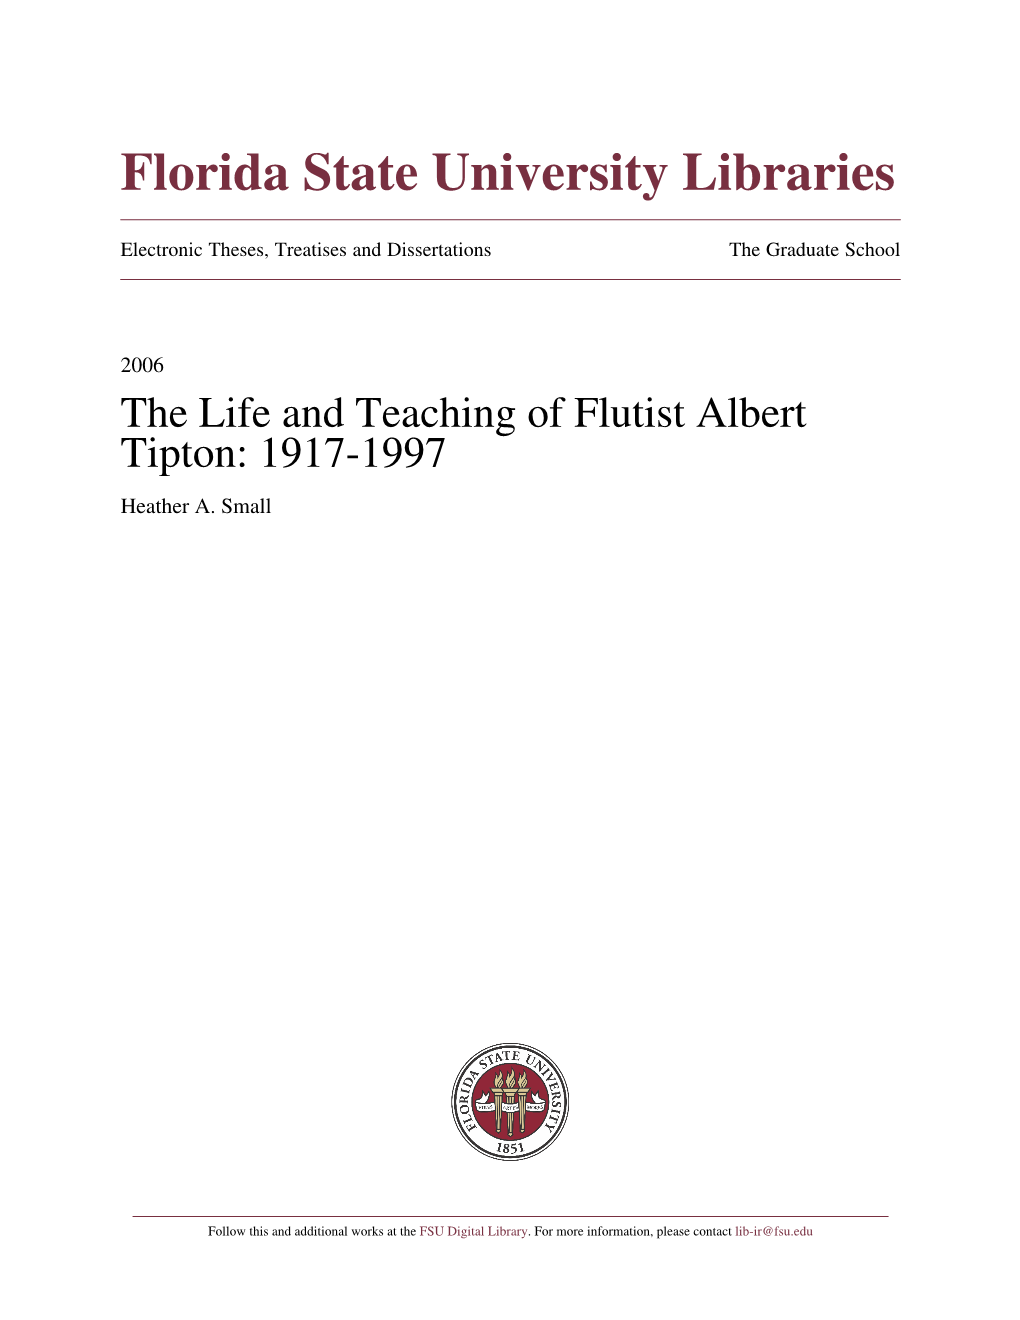 The Life and Teaching of Flutist Albert Tipton: 1917-1997 Heather A